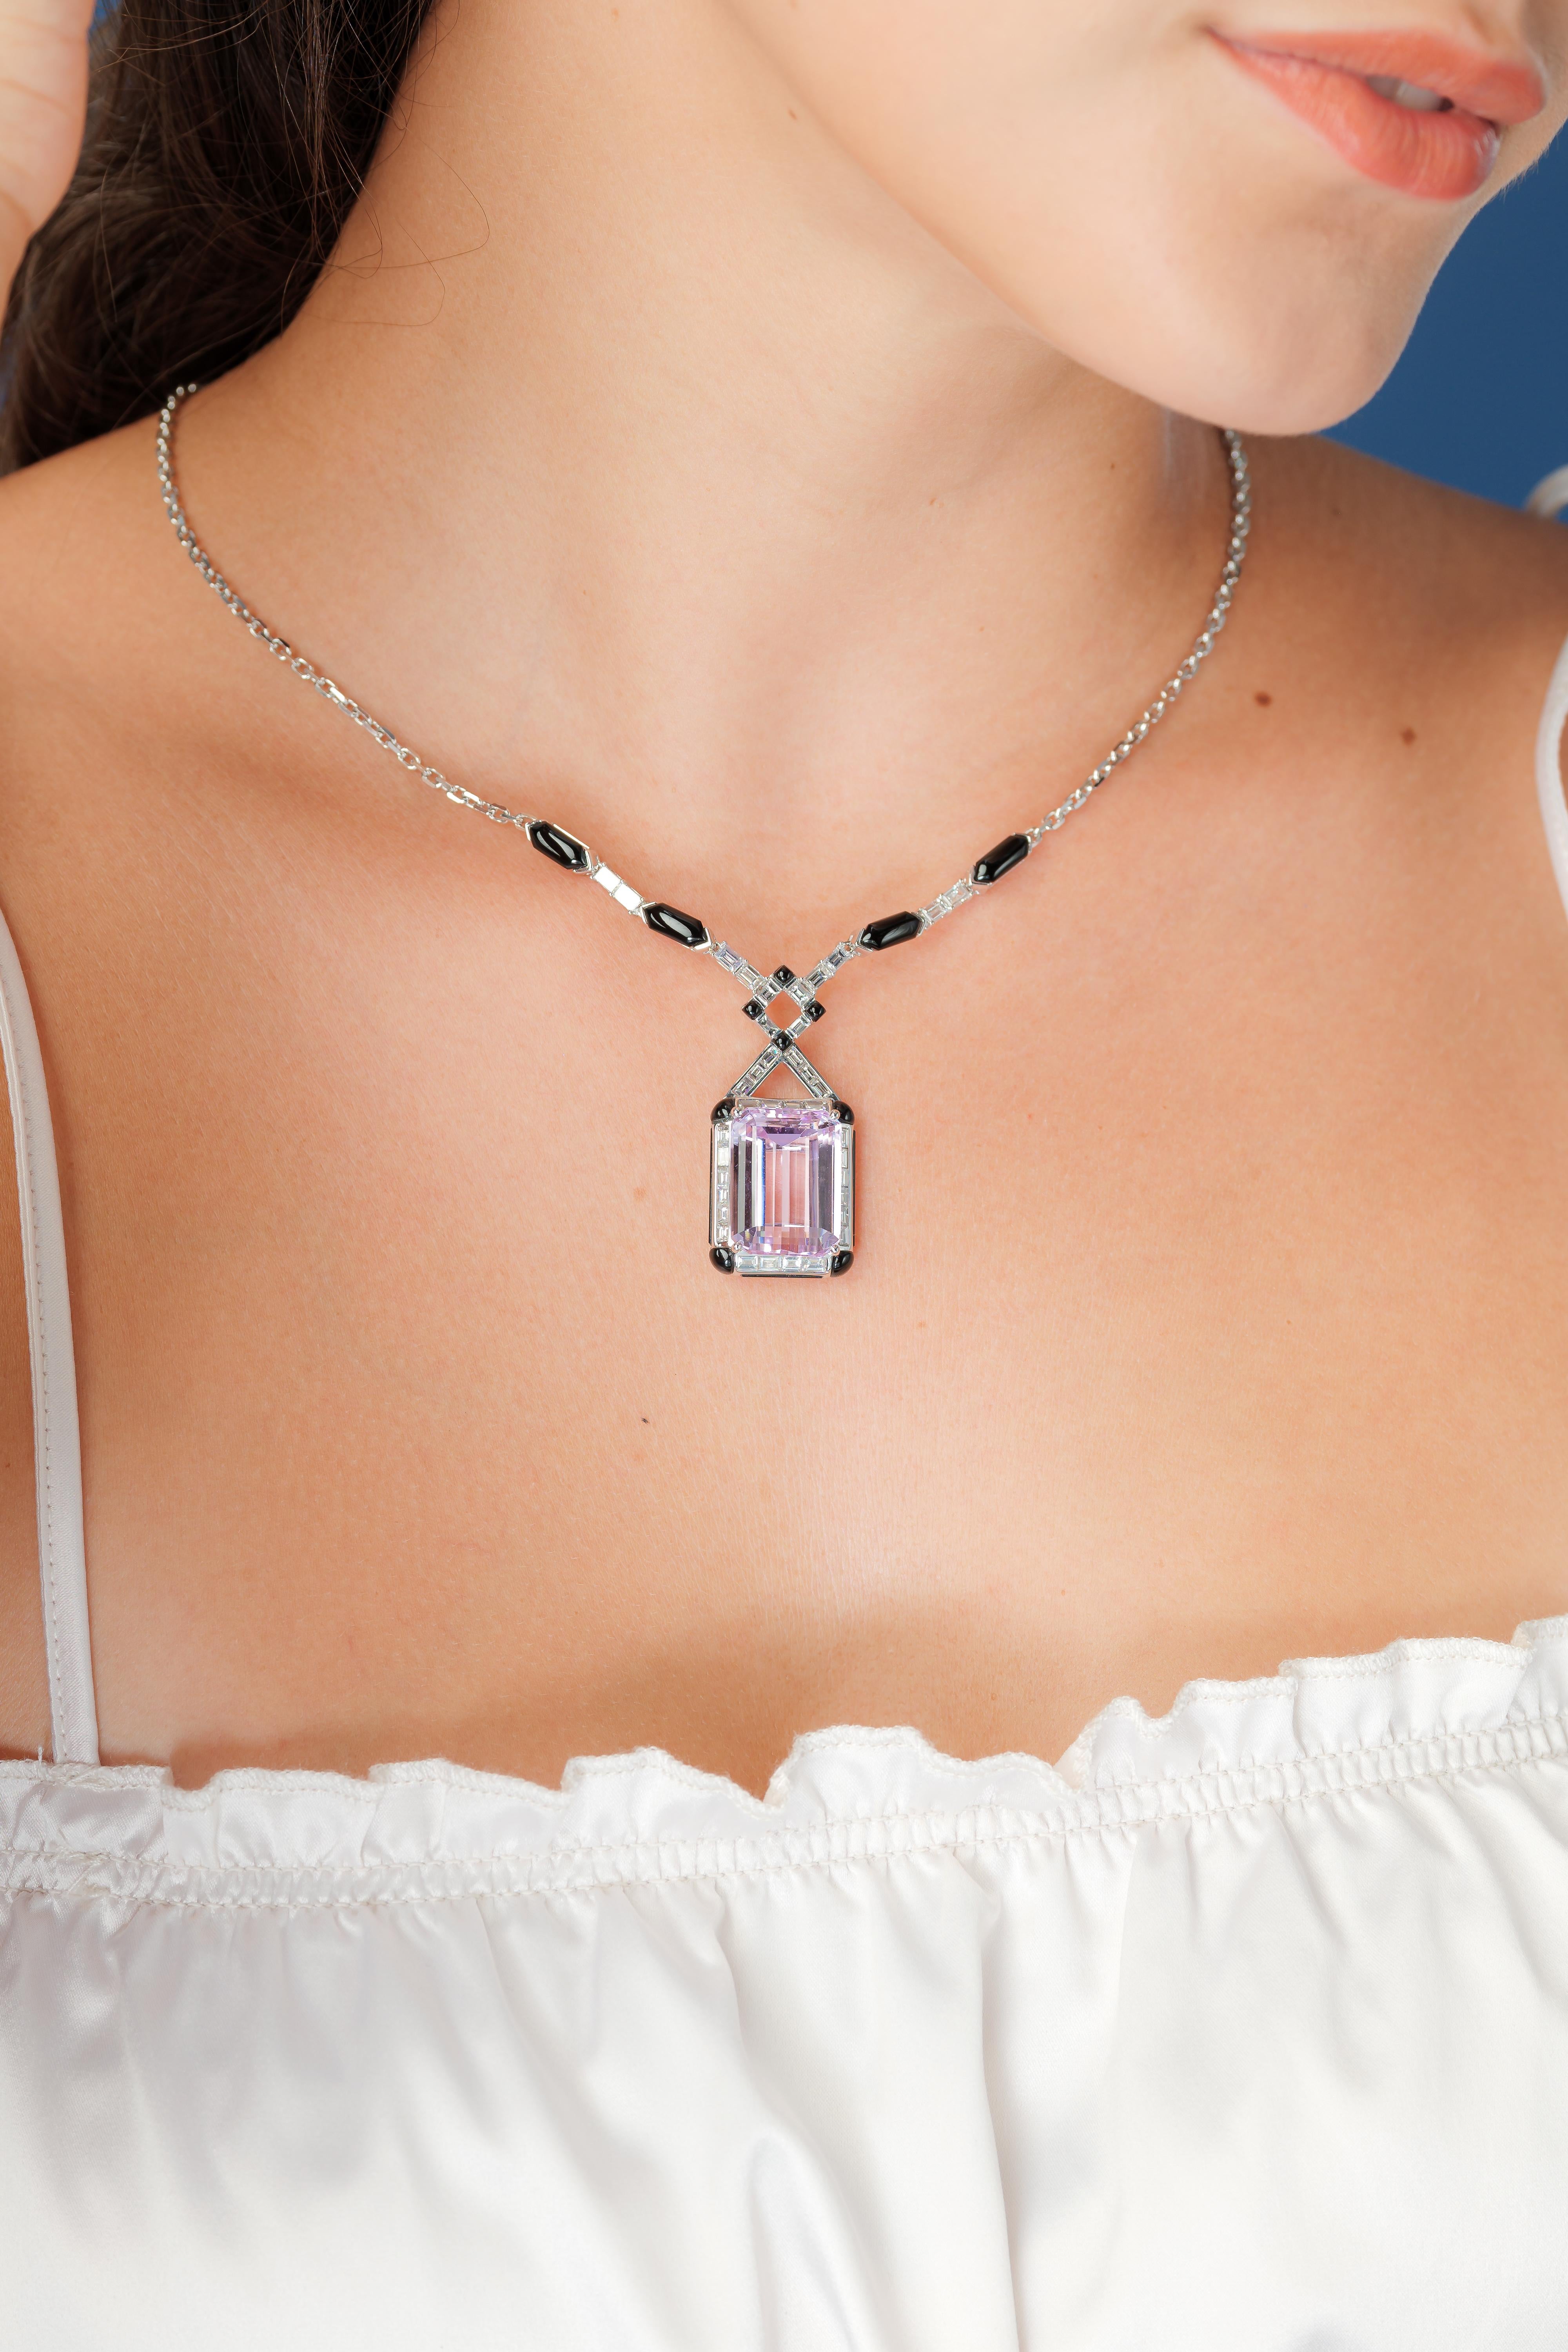 The pretty pink hues of Kunzites are often associated with love and romance. We present a unique collection of Kunzites that have been designed in an art deco style. These gorgeous gemstones are set upon an art deco frame of black onyx and baguette